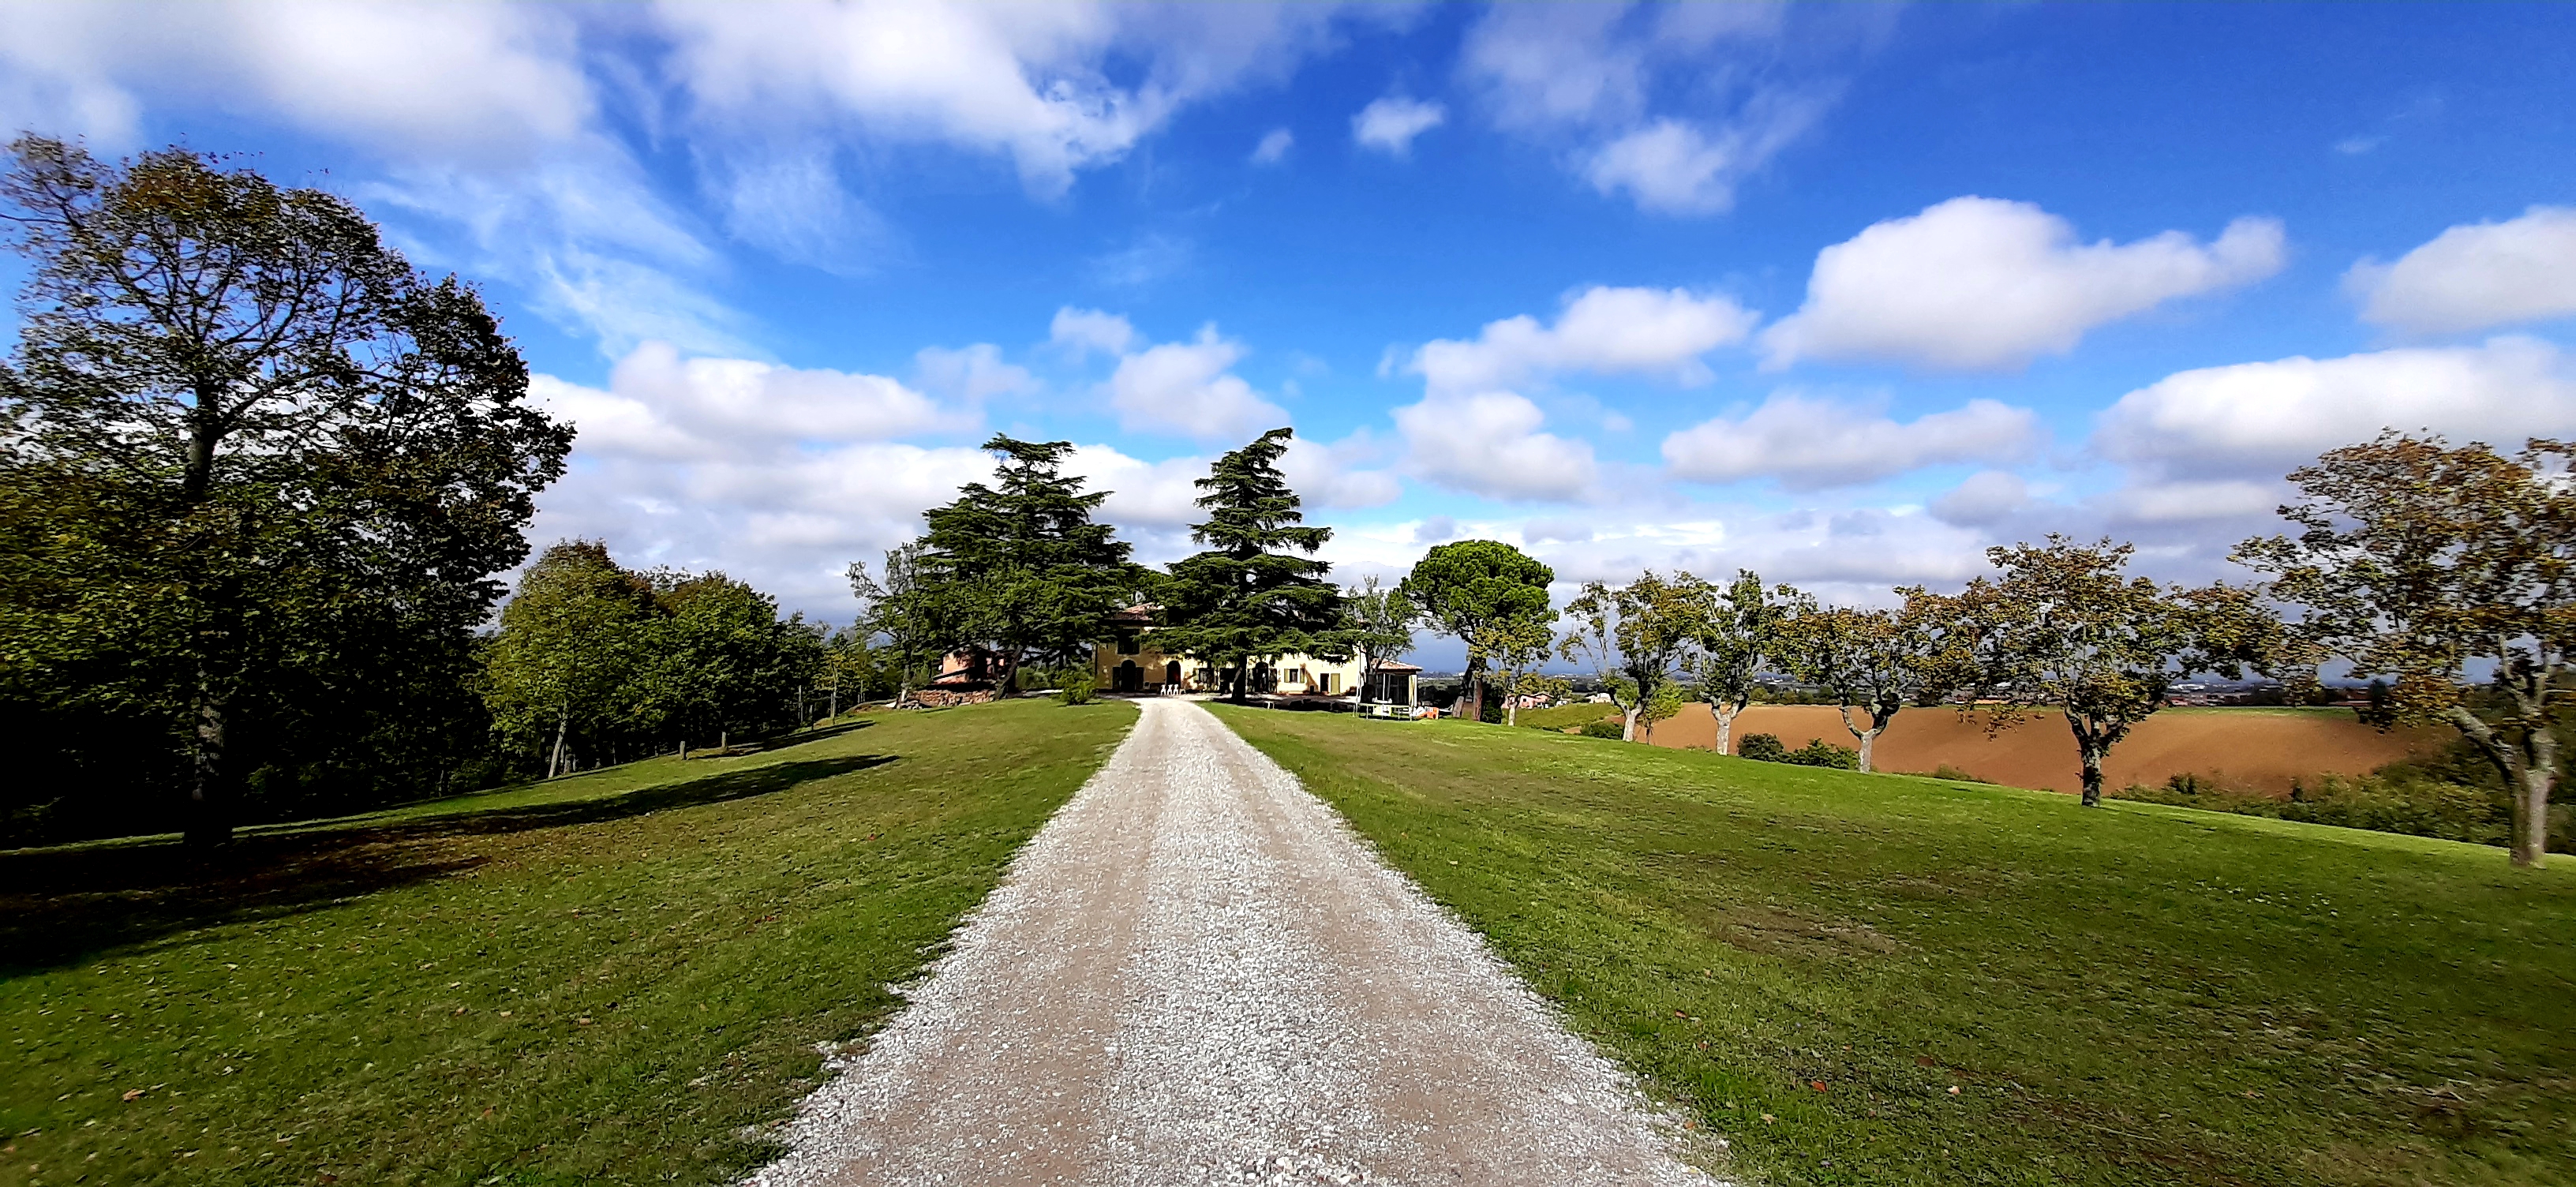 Camping Area with Farm in the hills of Bologna